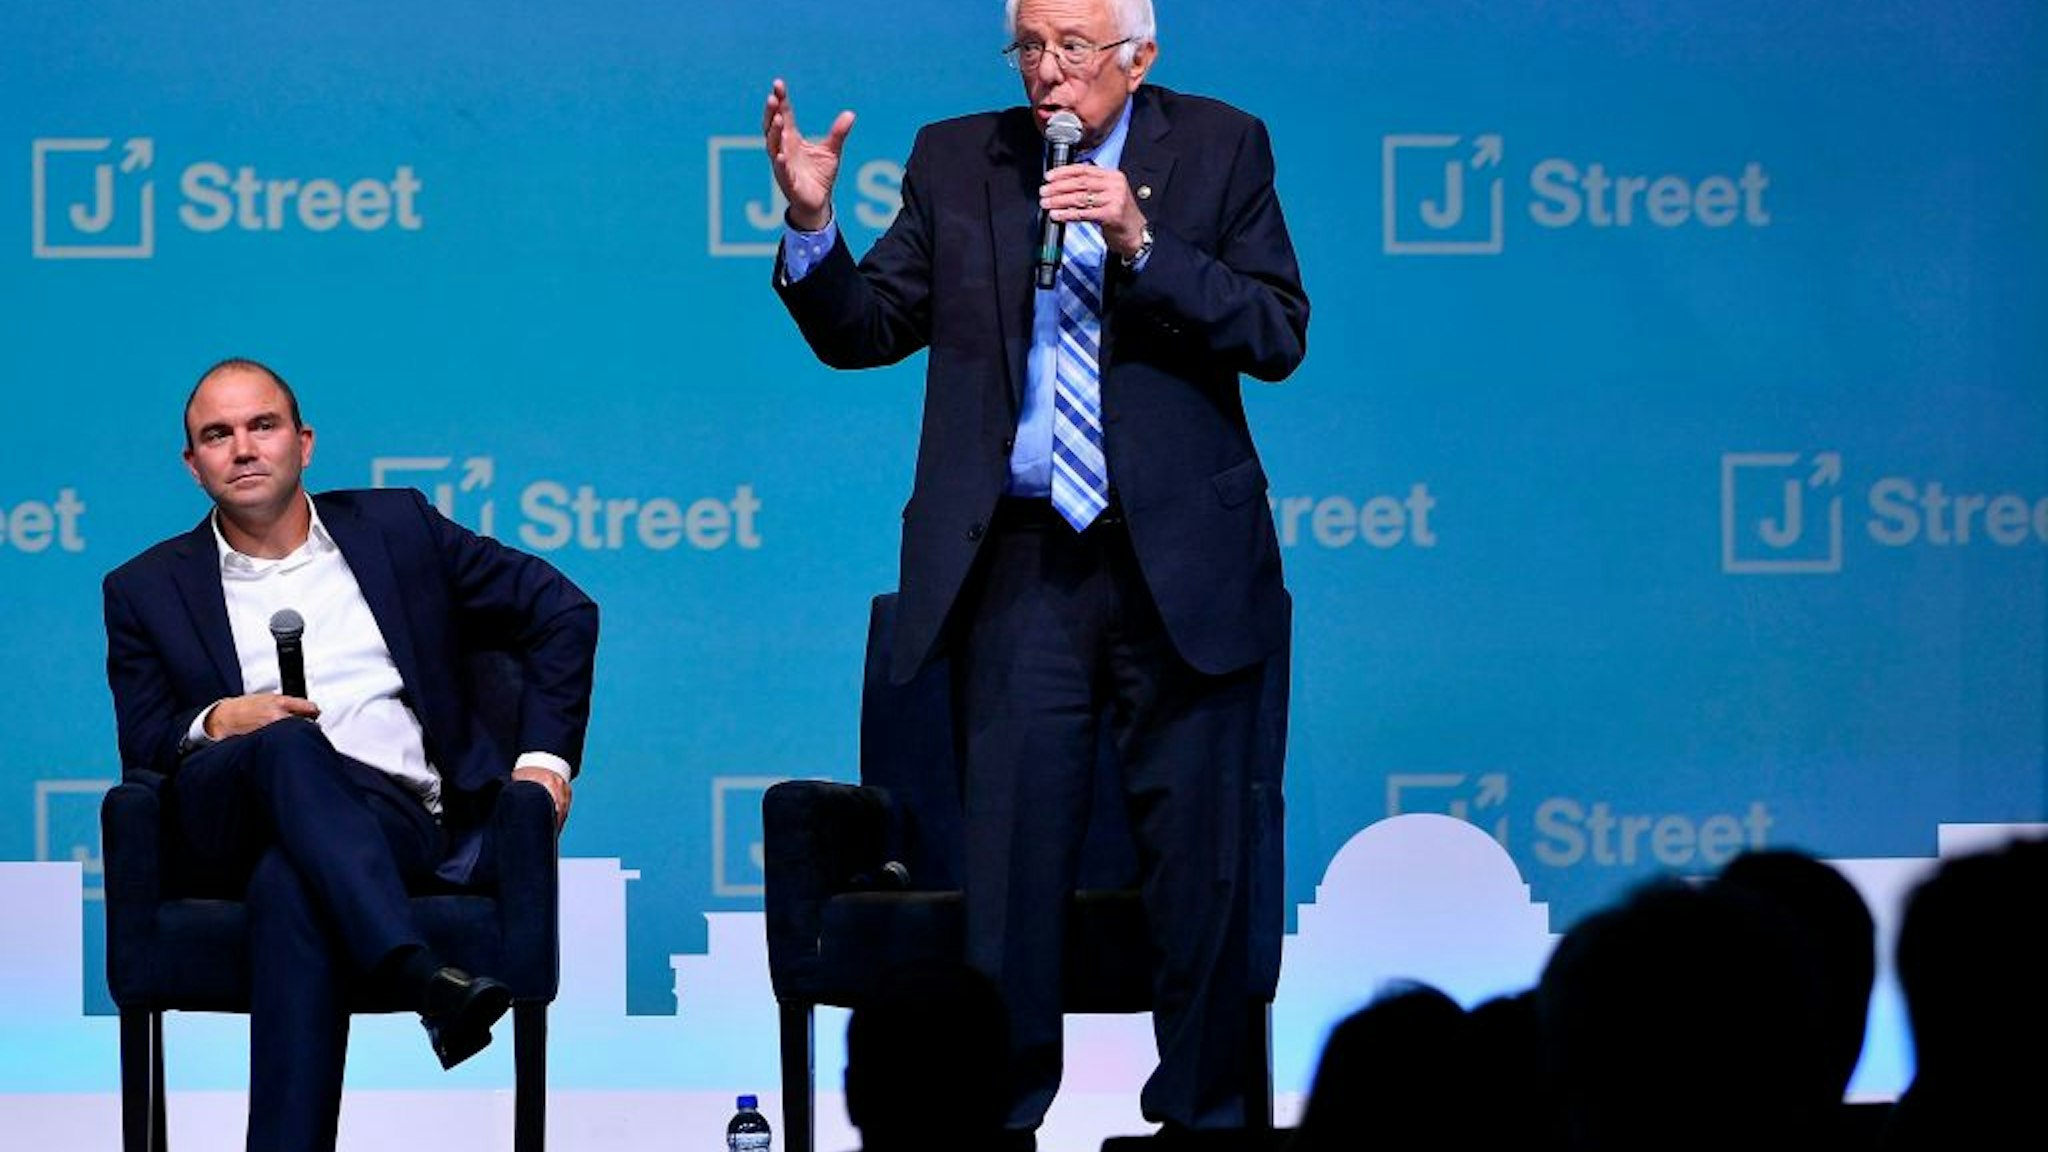 Democratic presidential candidate Senator Bernie Sanders (C) speaks during the 2019 J Street National Conference at the Walter E. Washington Convention Center in Washington, DC on October 28, 2019.